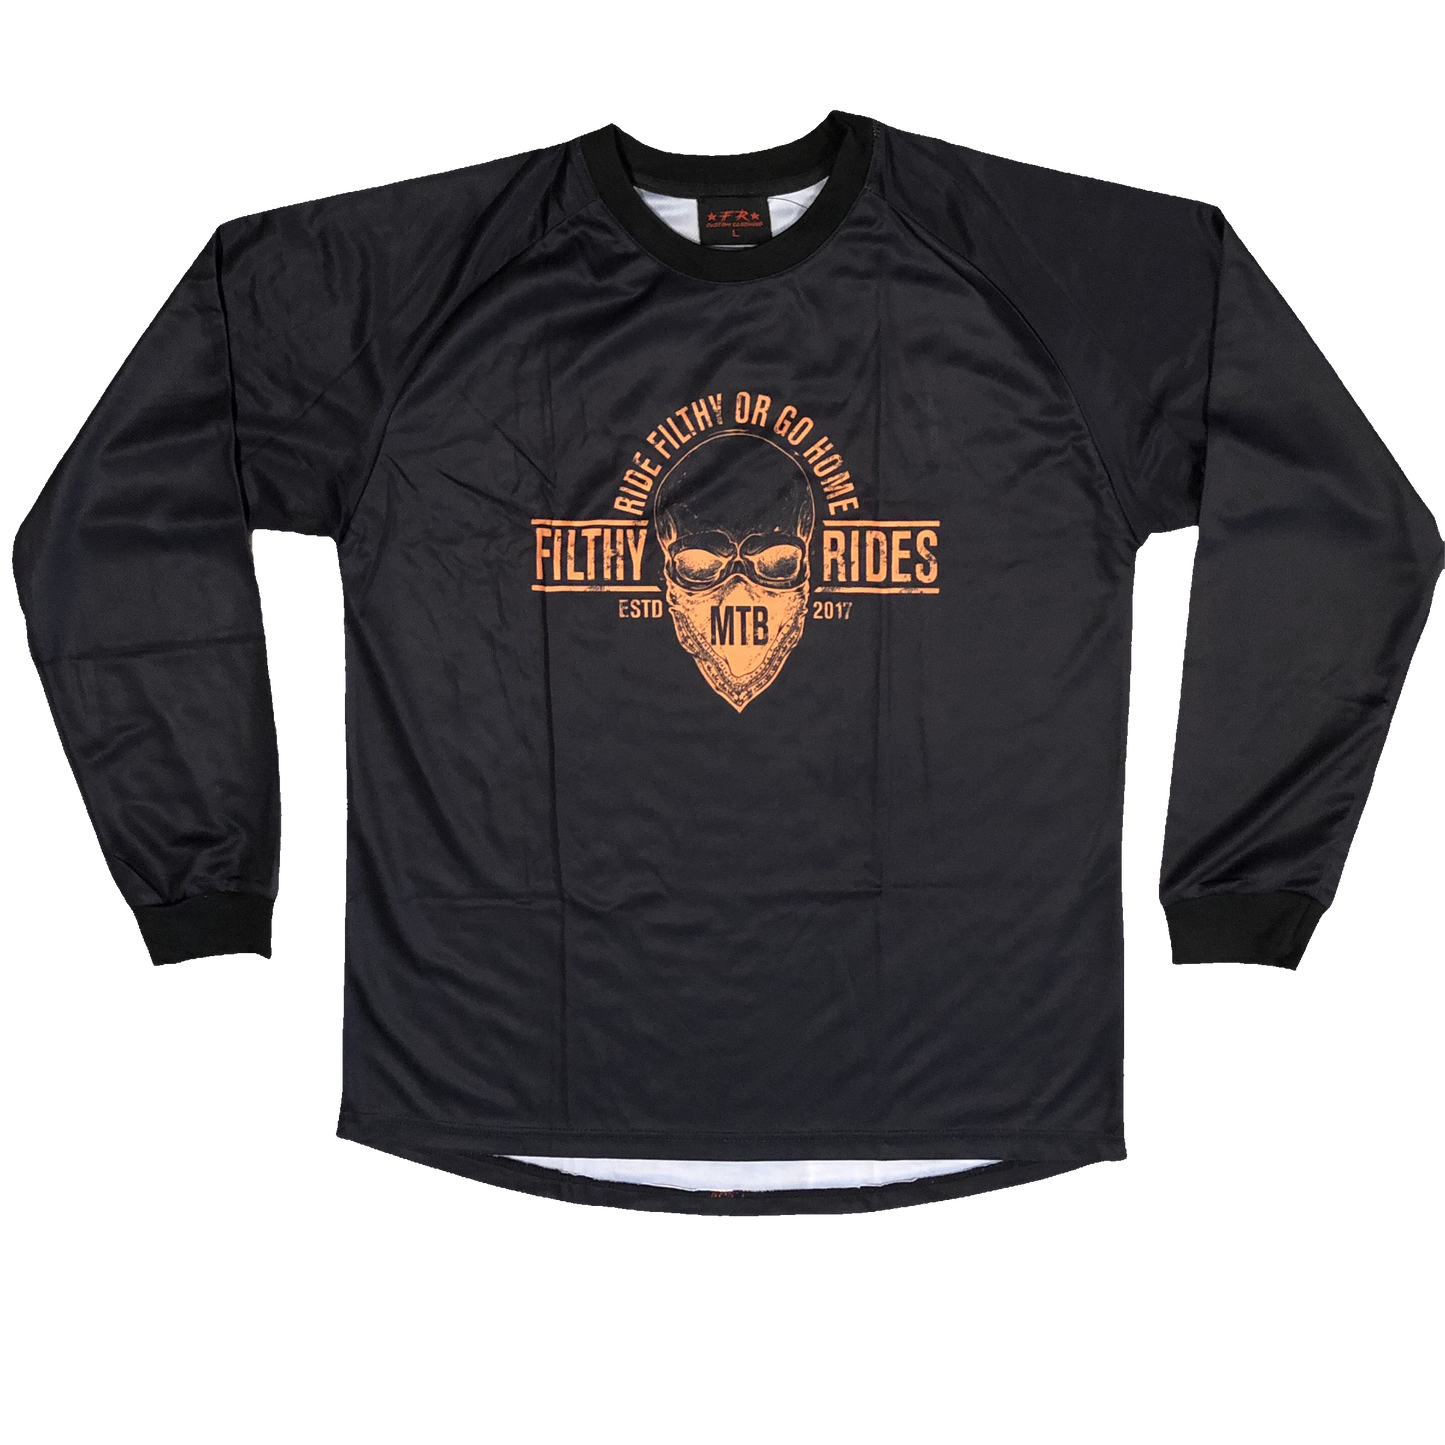 RIDE FILTHY OR GO HOME JERSEYS - LONG OR SHORT SLEEVE (PRE ORDER)